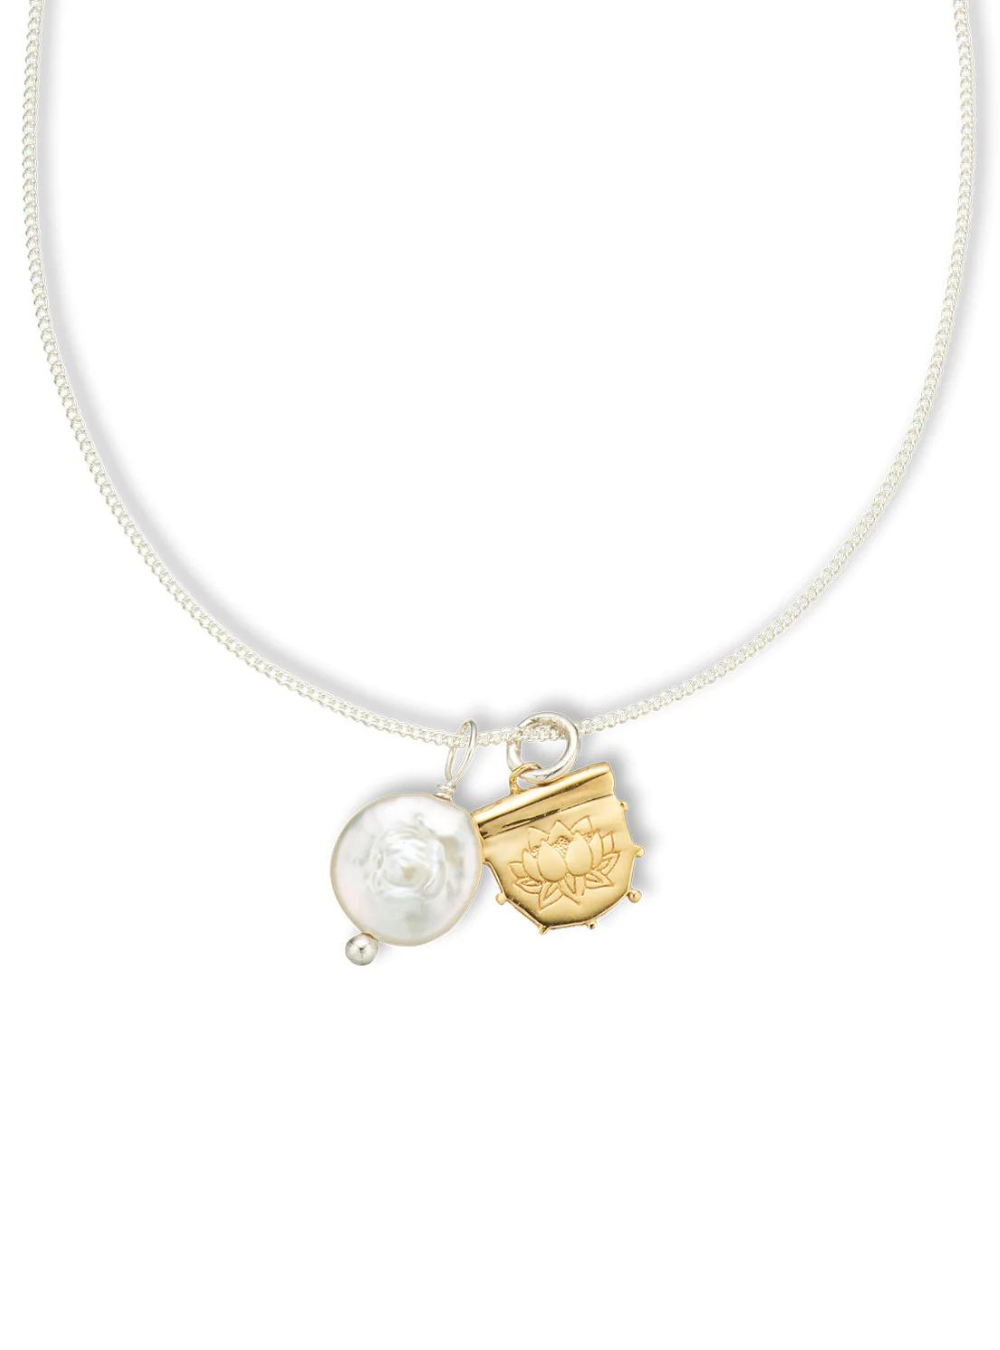 Lotus & Pearl Amulet Necklace